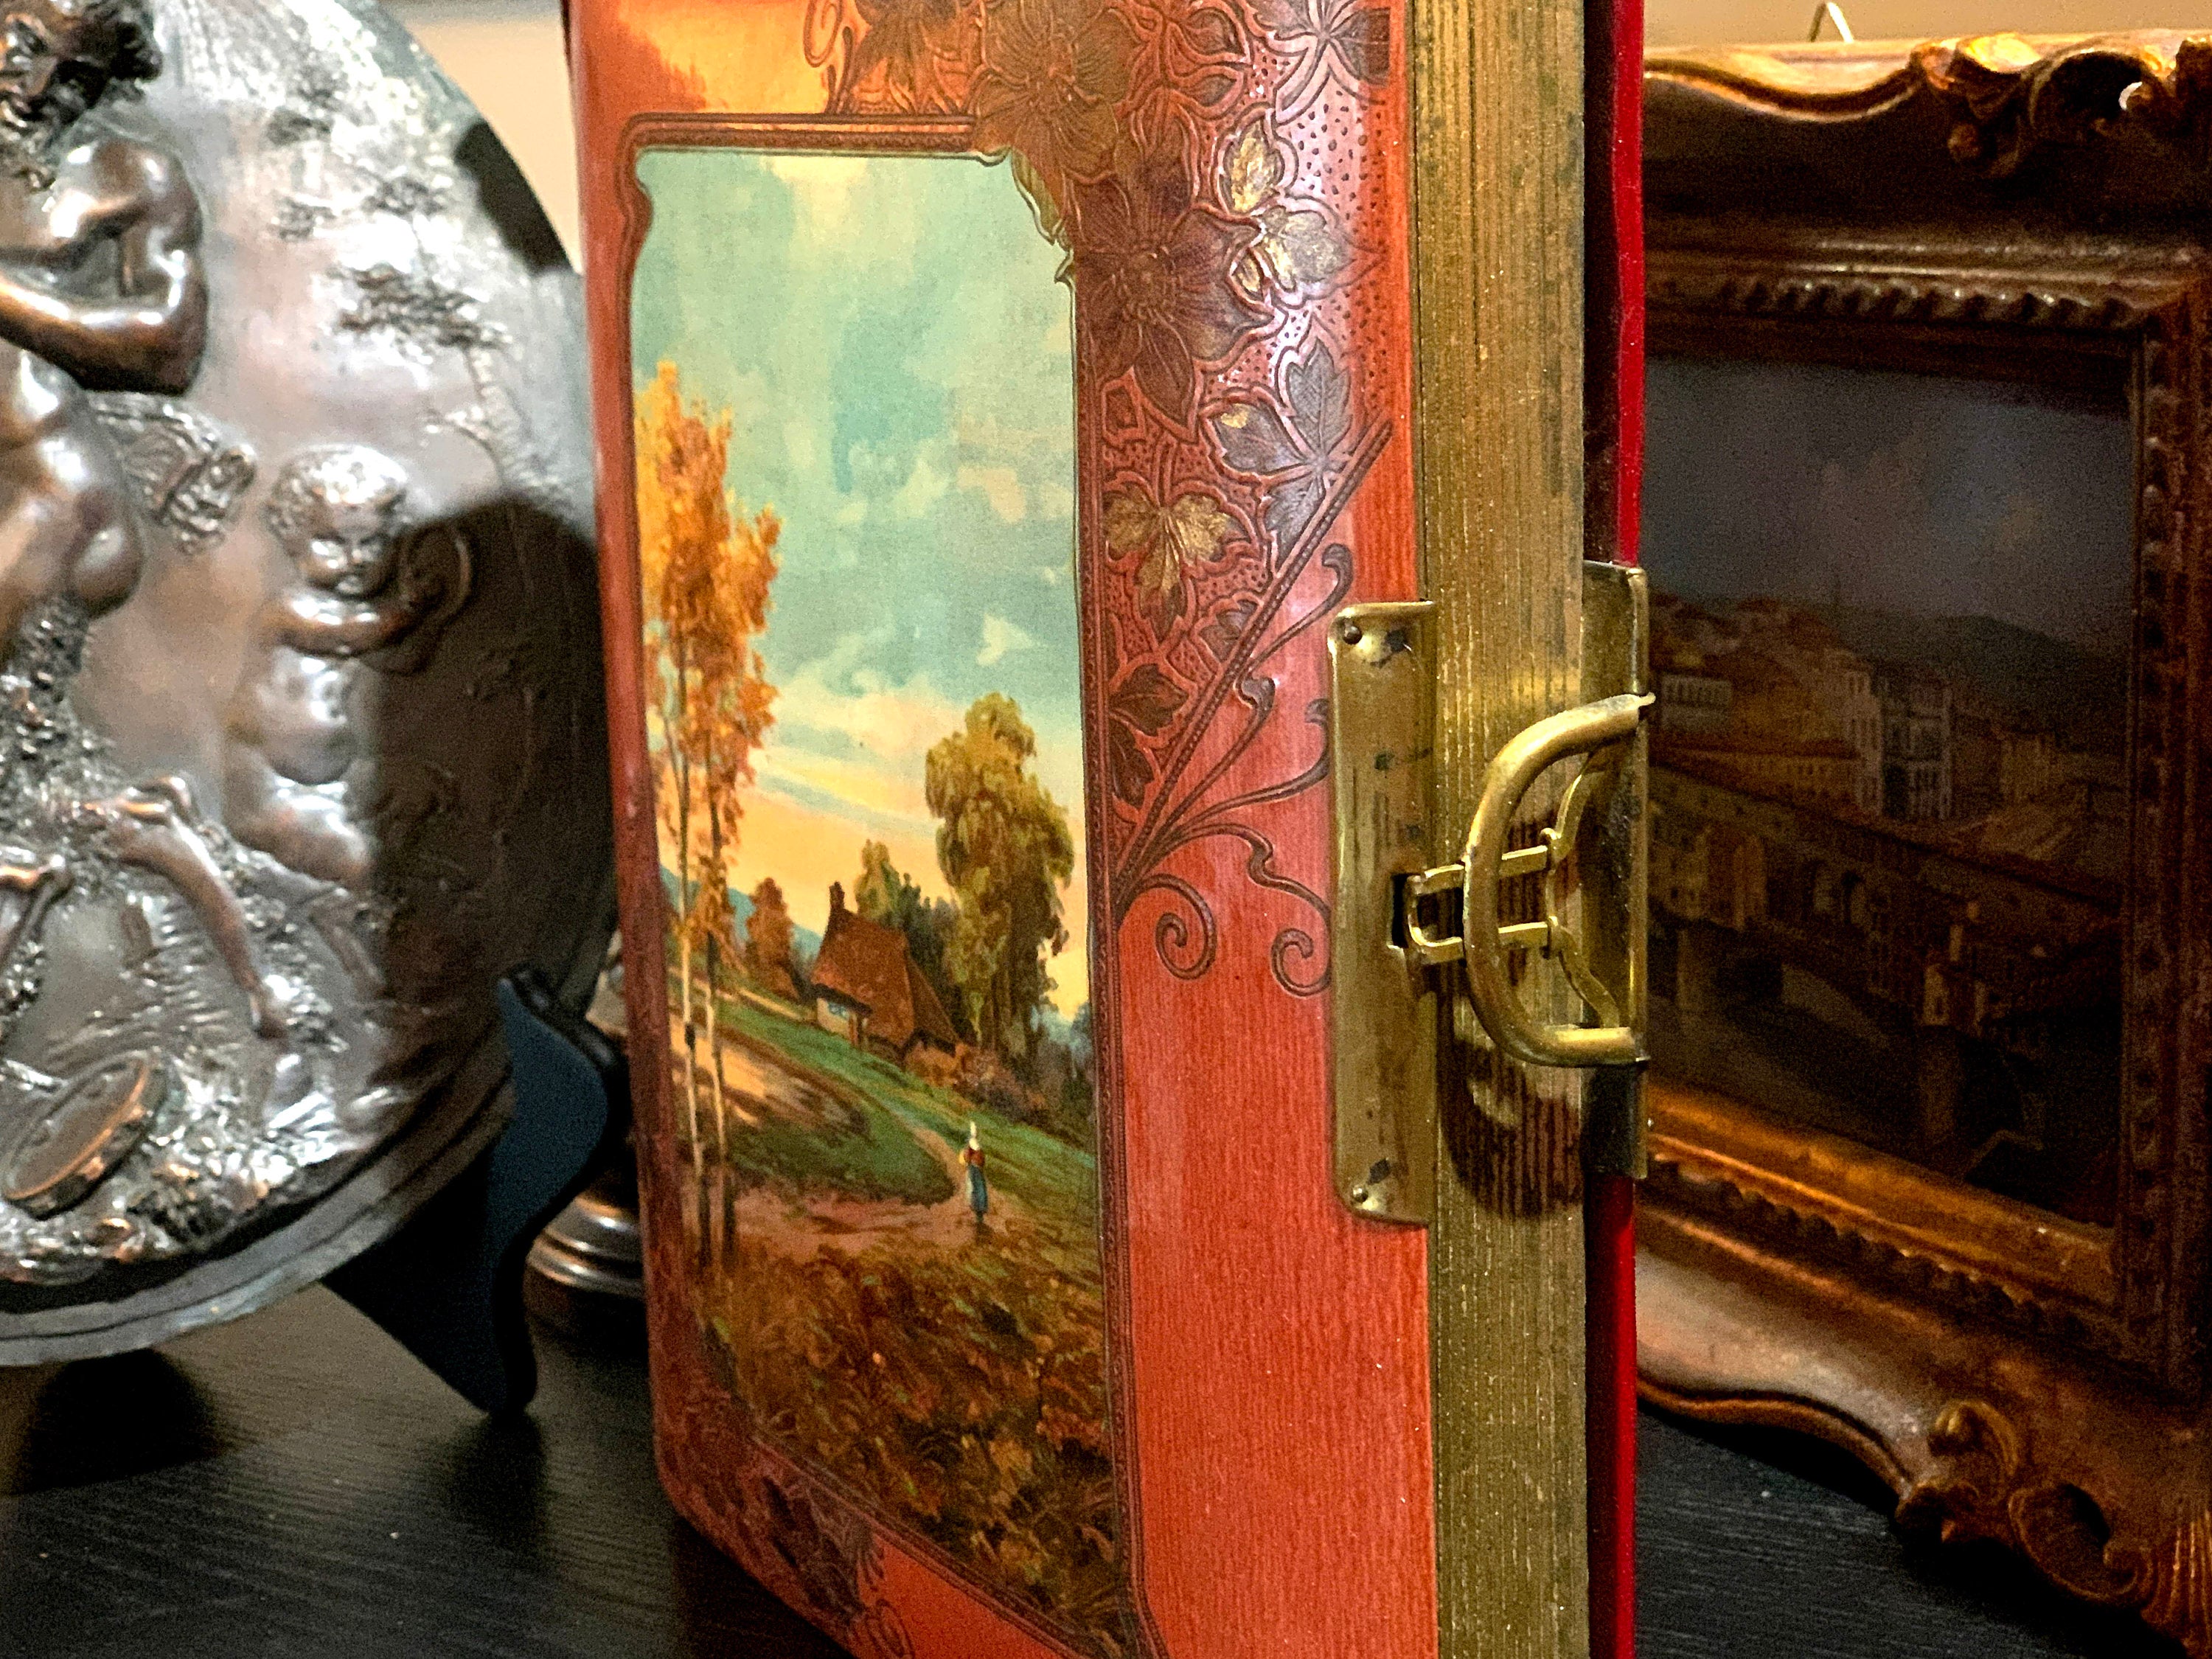 Antique Victorian Photo Album with Country Scene and Working Ornate Clasp, Includes Two Photographs, c1880s